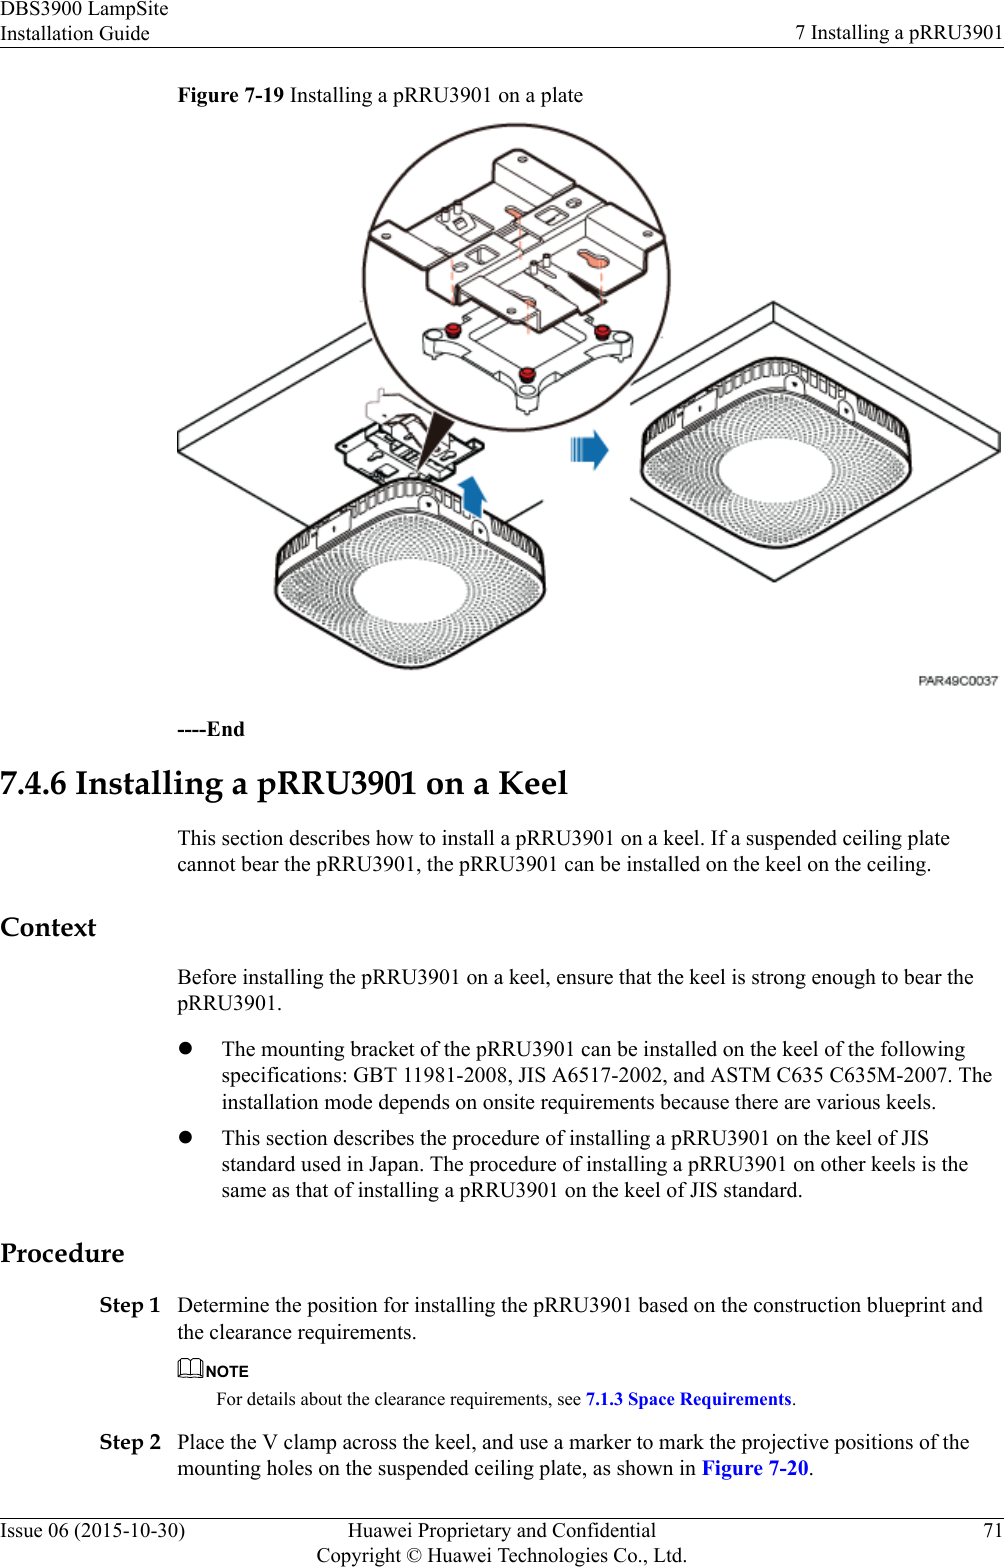 Figure 7-19 Installing a pRRU3901 on a plate----End7.4.6 Installing a pRRU3901 on a KeelThis section describes how to install a pRRU3901 on a keel. If a suspended ceiling platecannot bear the pRRU3901, the pRRU3901 can be installed on the keel on the ceiling.ContextBefore installing the pRRU3901 on a keel, ensure that the keel is strong enough to bear thepRRU3901.lThe mounting bracket of the pRRU3901 can be installed on the keel of the followingspecifications: GBT 11981-2008, JIS A6517-2002, and ASTM C635 C635M-2007. Theinstallation mode depends on onsite requirements because there are various keels.lThis section describes the procedure of installing a pRRU3901 on the keel of JISstandard used in Japan. The procedure of installing a pRRU3901 on other keels is thesame as that of installing a pRRU3901 on the keel of JIS standard.ProcedureStep 1 Determine the position for installing the pRRU3901 based on the construction blueprint andthe clearance requirements.NOTEFor details about the clearance requirements, see 7.1.3 Space Requirements.Step 2 Place the V clamp across the keel, and use a marker to mark the projective positions of themounting holes on the suspended ceiling plate, as shown in Figure 7-20.DBS3900 LampSiteInstallation Guide 7 Installing a pRRU3901Issue 06 (2015-10-30) Huawei Proprietary and ConfidentialCopyright © Huawei Technologies Co., Ltd.71